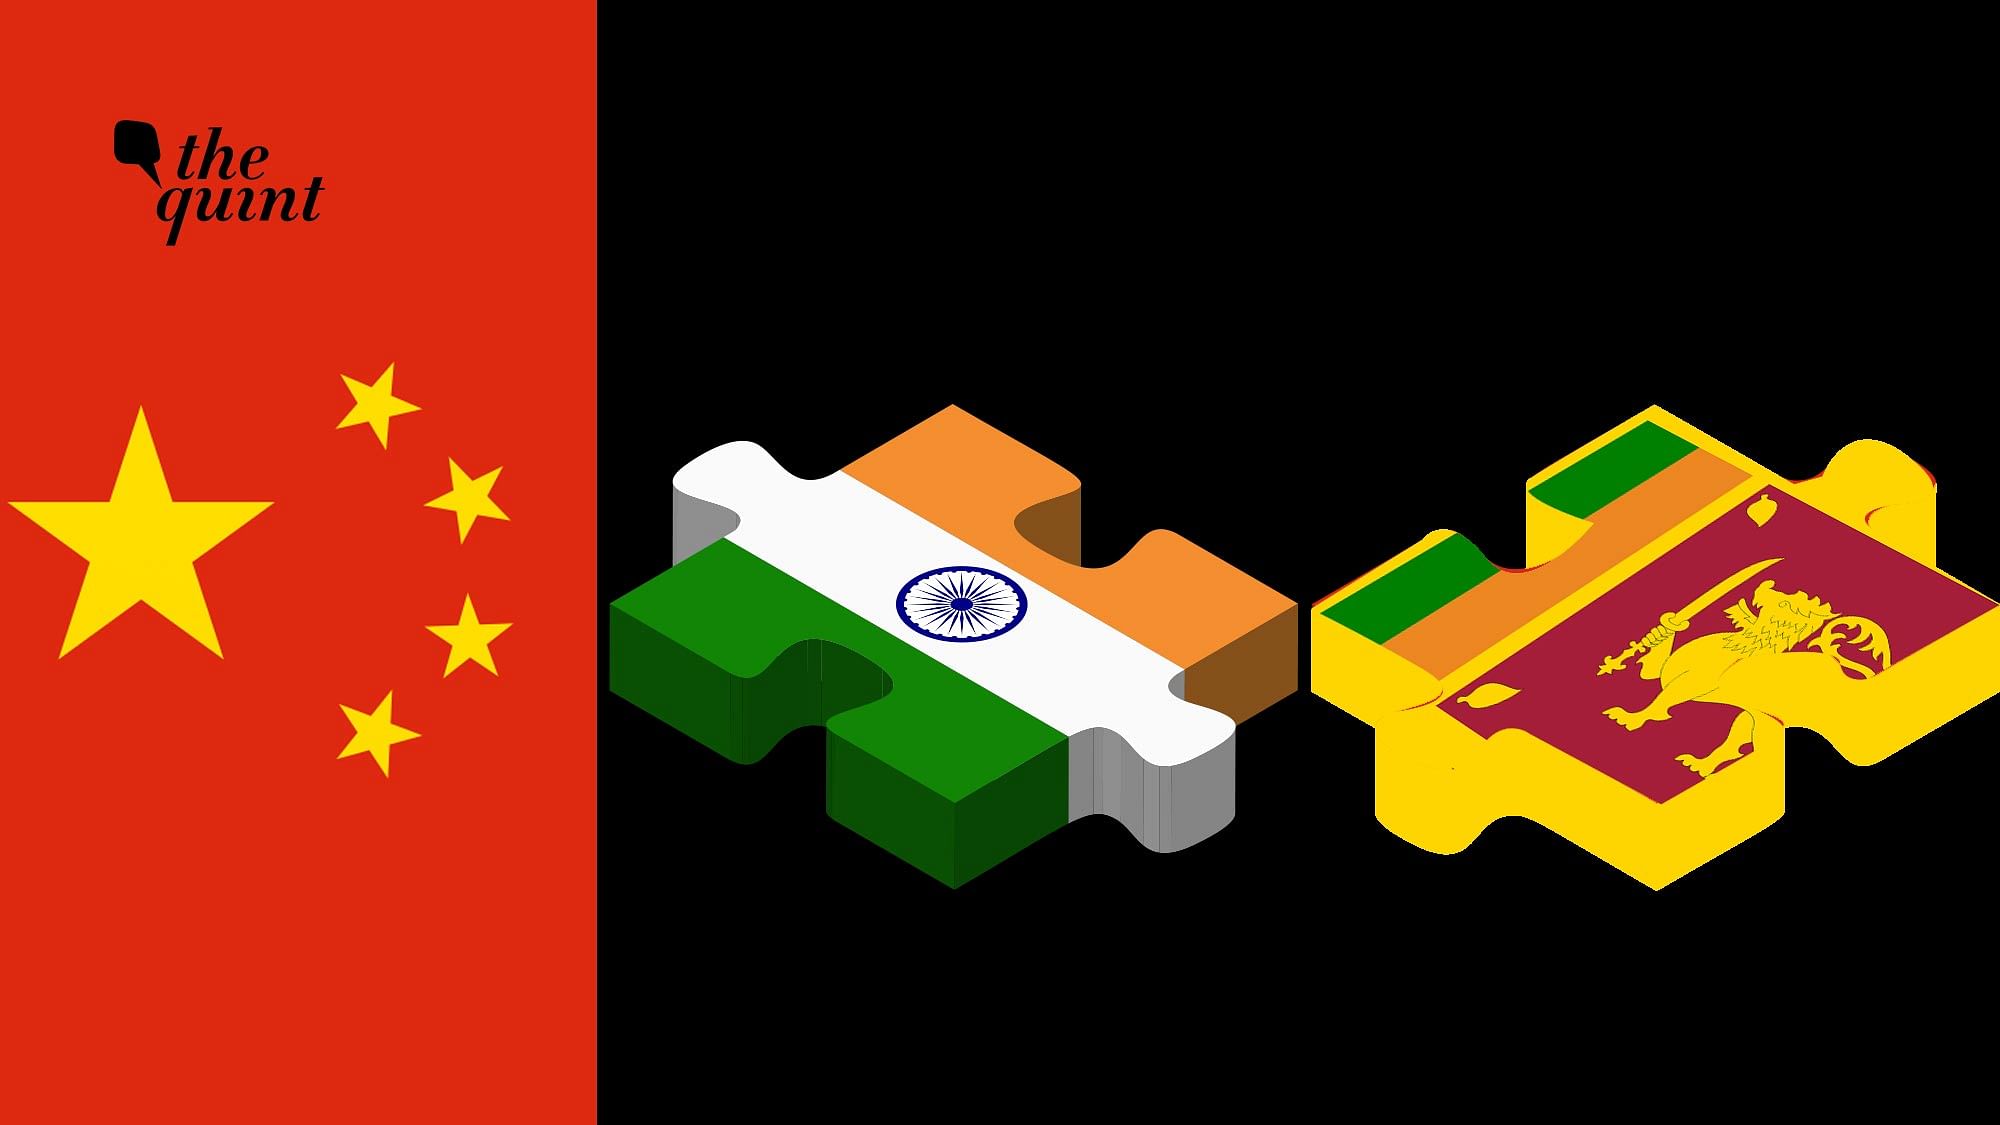 Image of Chinese flag (L), Indian flag and Sri Lankan flag (R) used for representational purposes.